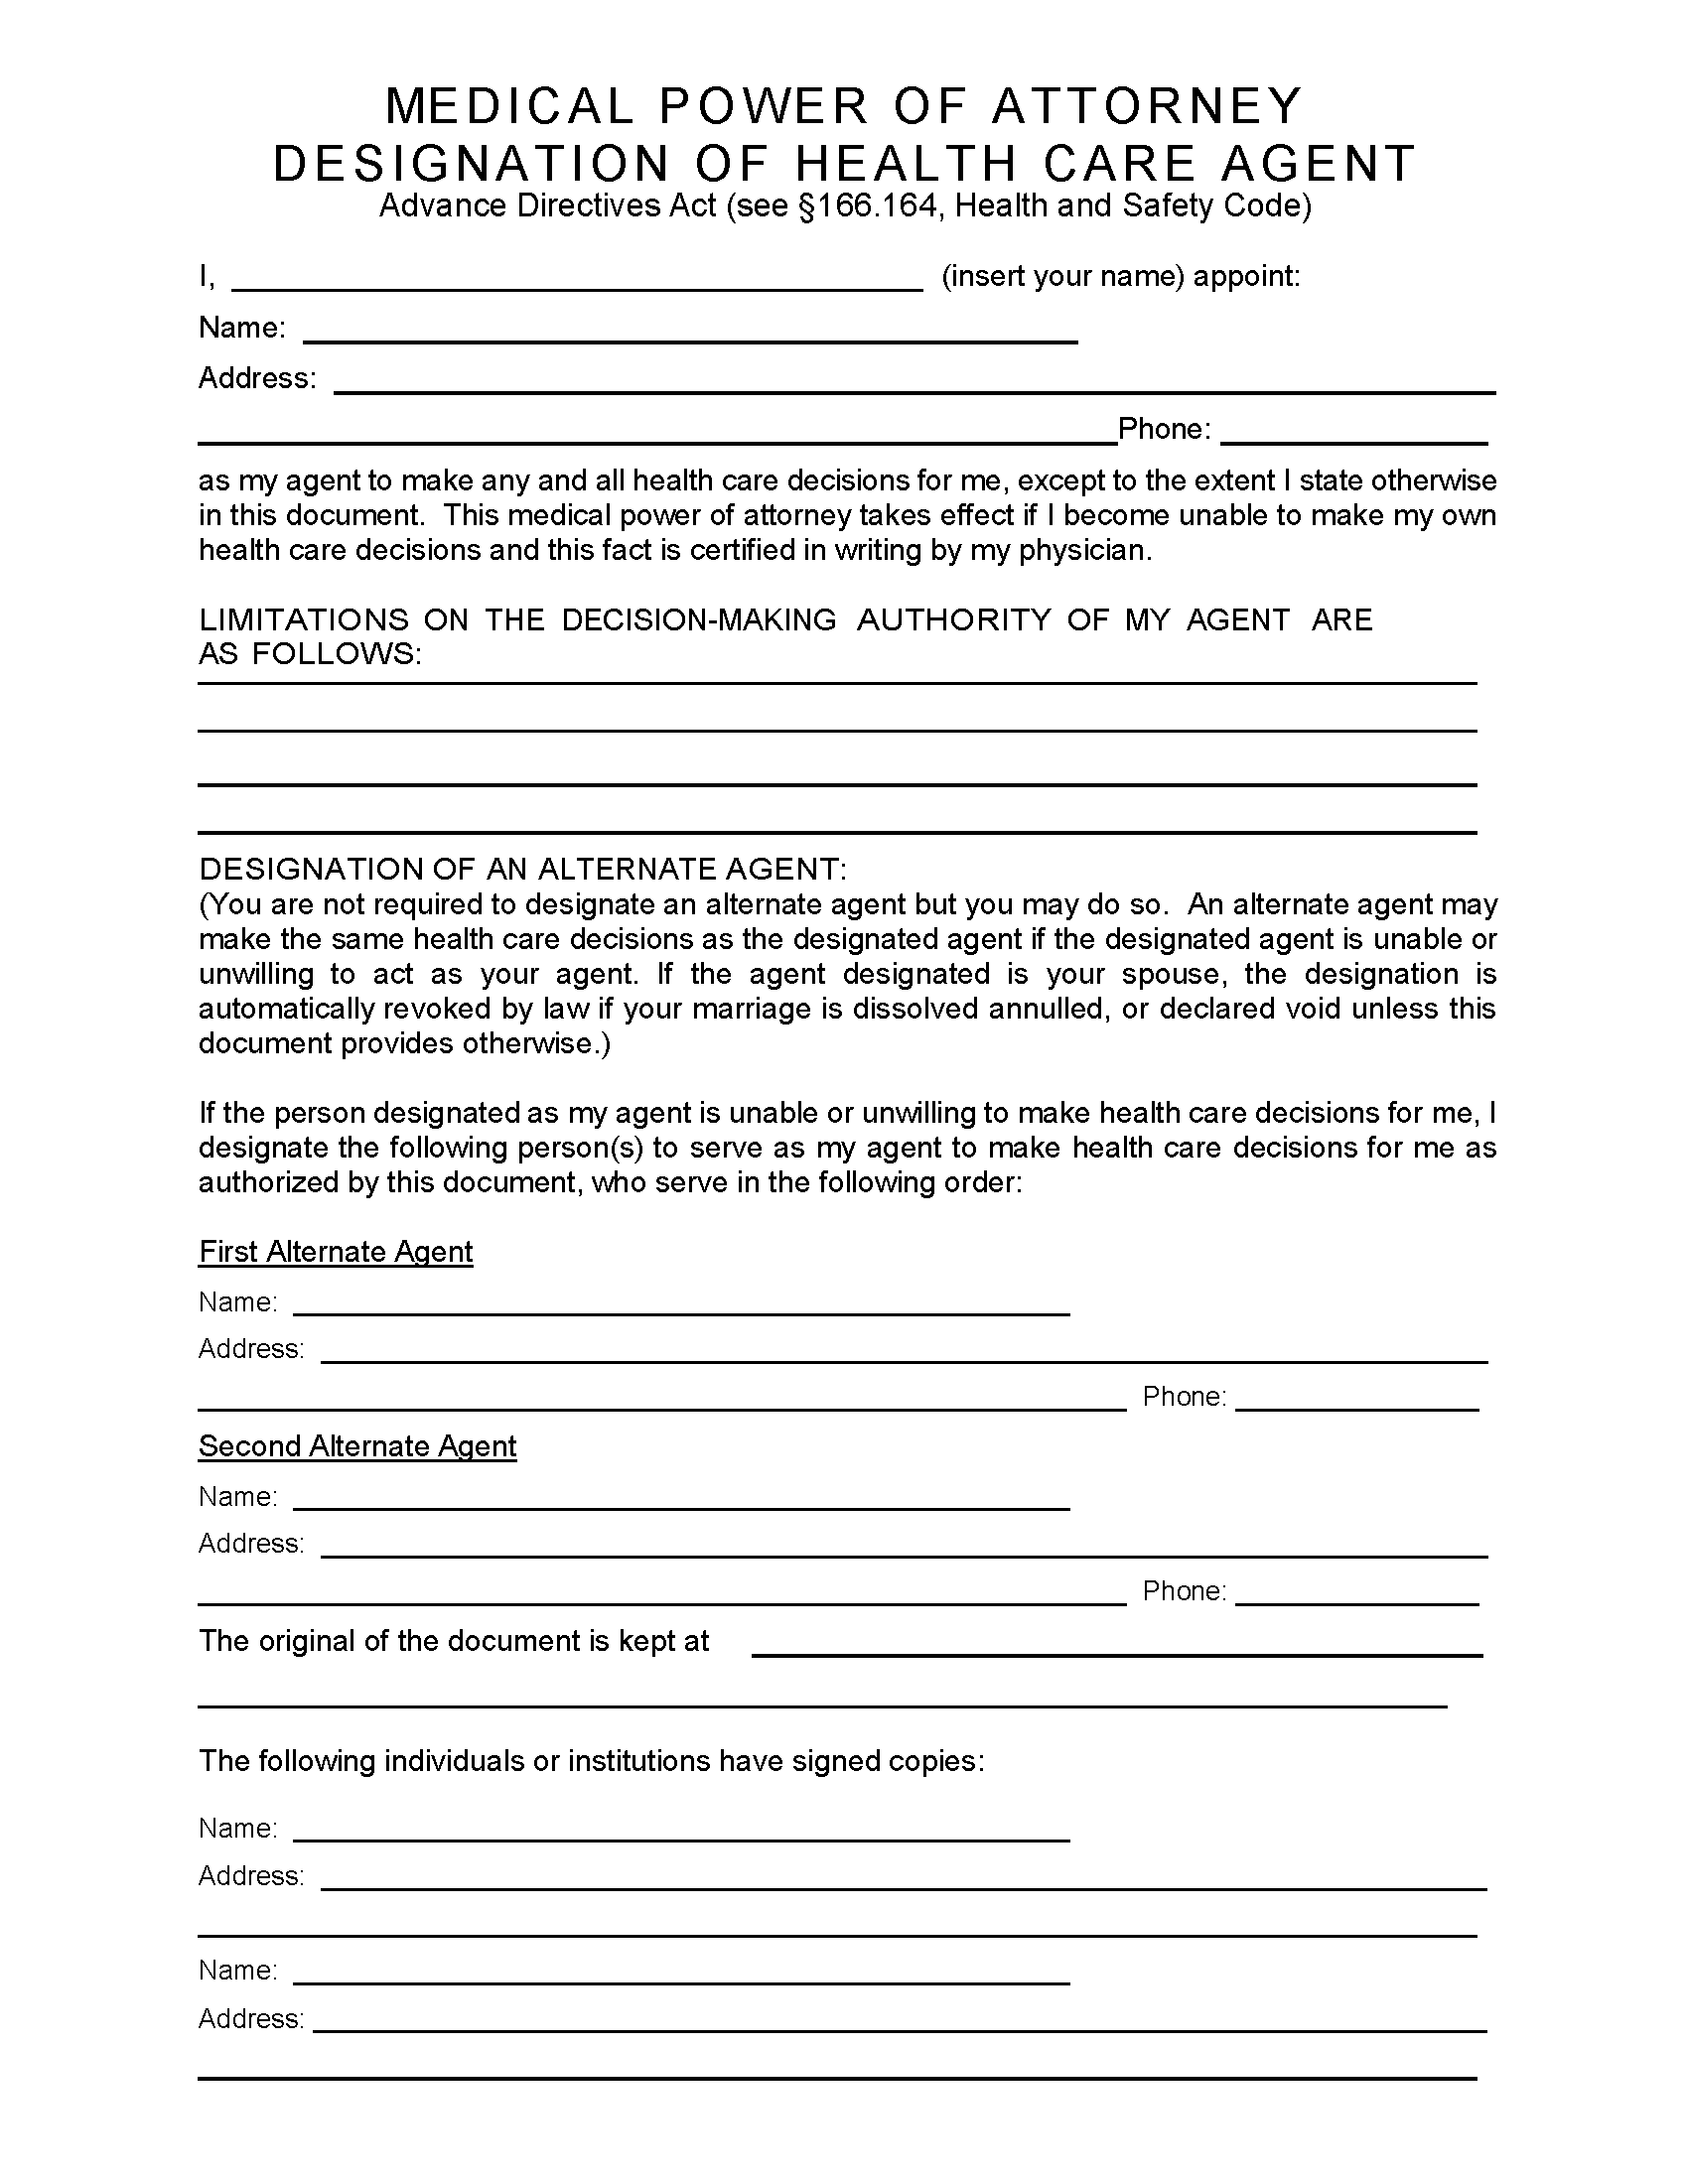 printable-medical-power-of-attorney-form-texas-printable-forms-free